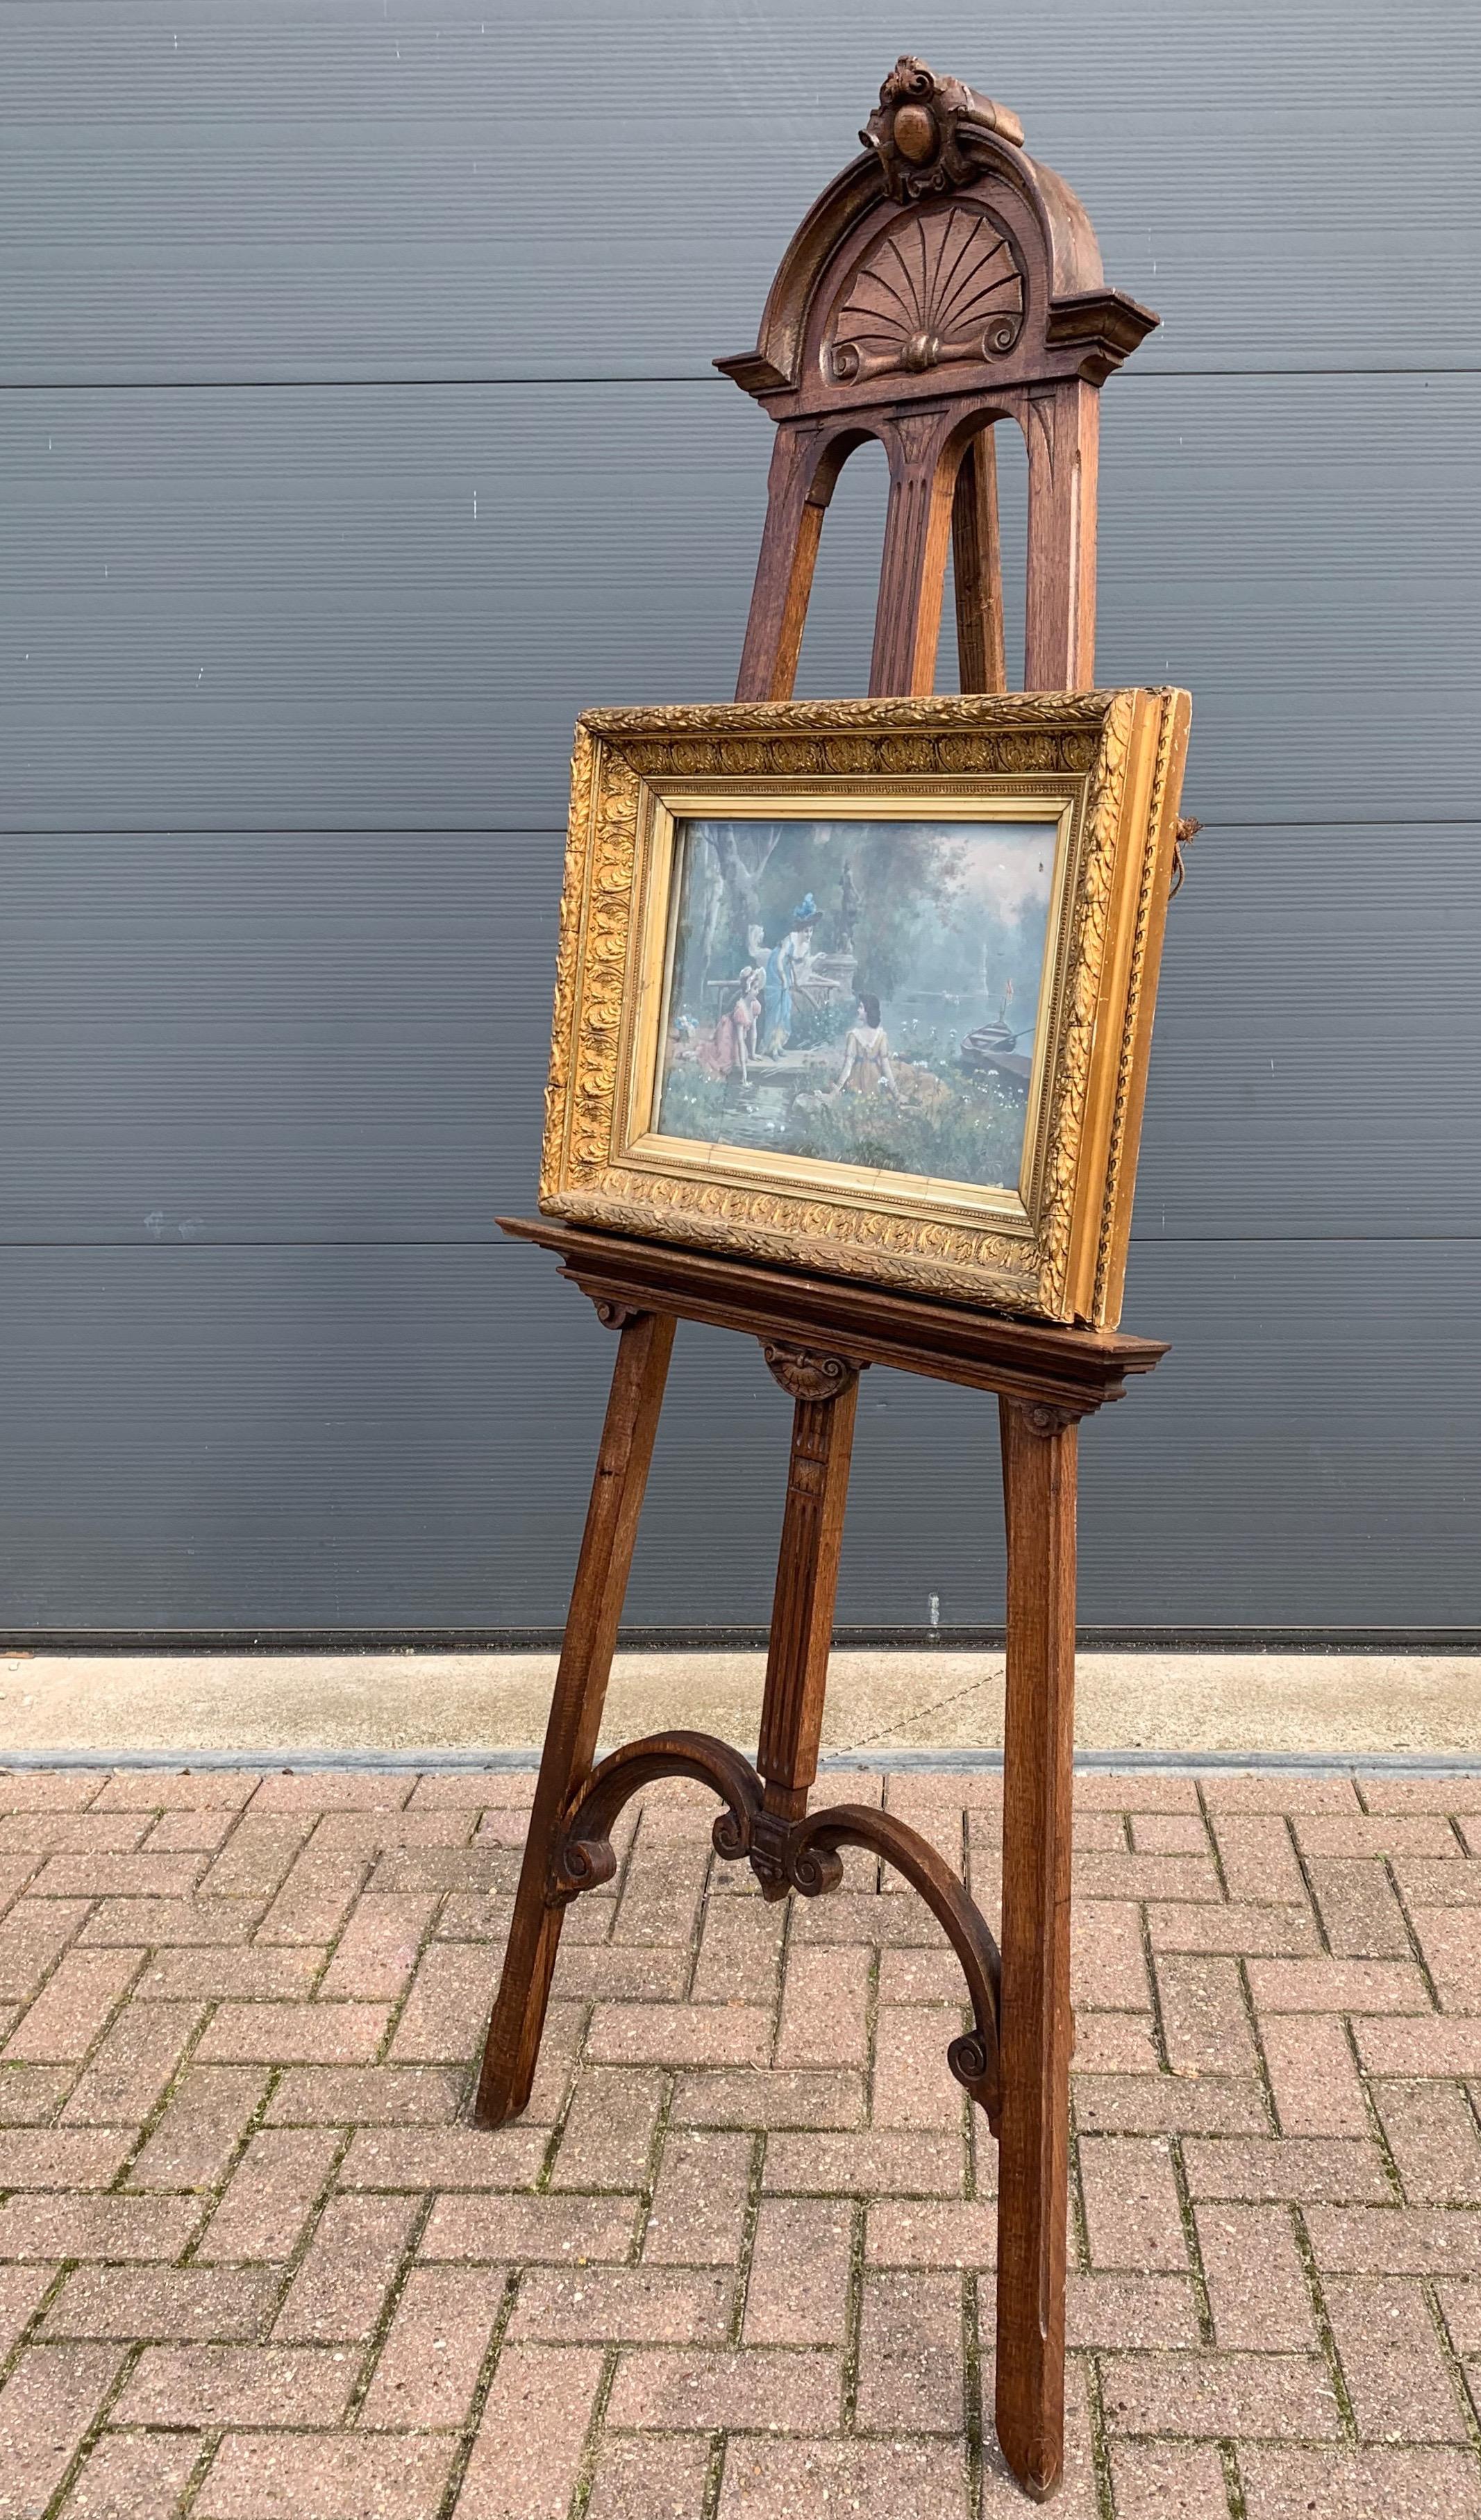 Beautiful design and practical to use painting stand.

This highly stylish, late 19th century studio easel has it all:
1. The design with its striking motifs and fine details is both rare and aesthetically very pleasing.
2. This handcrafted and hand